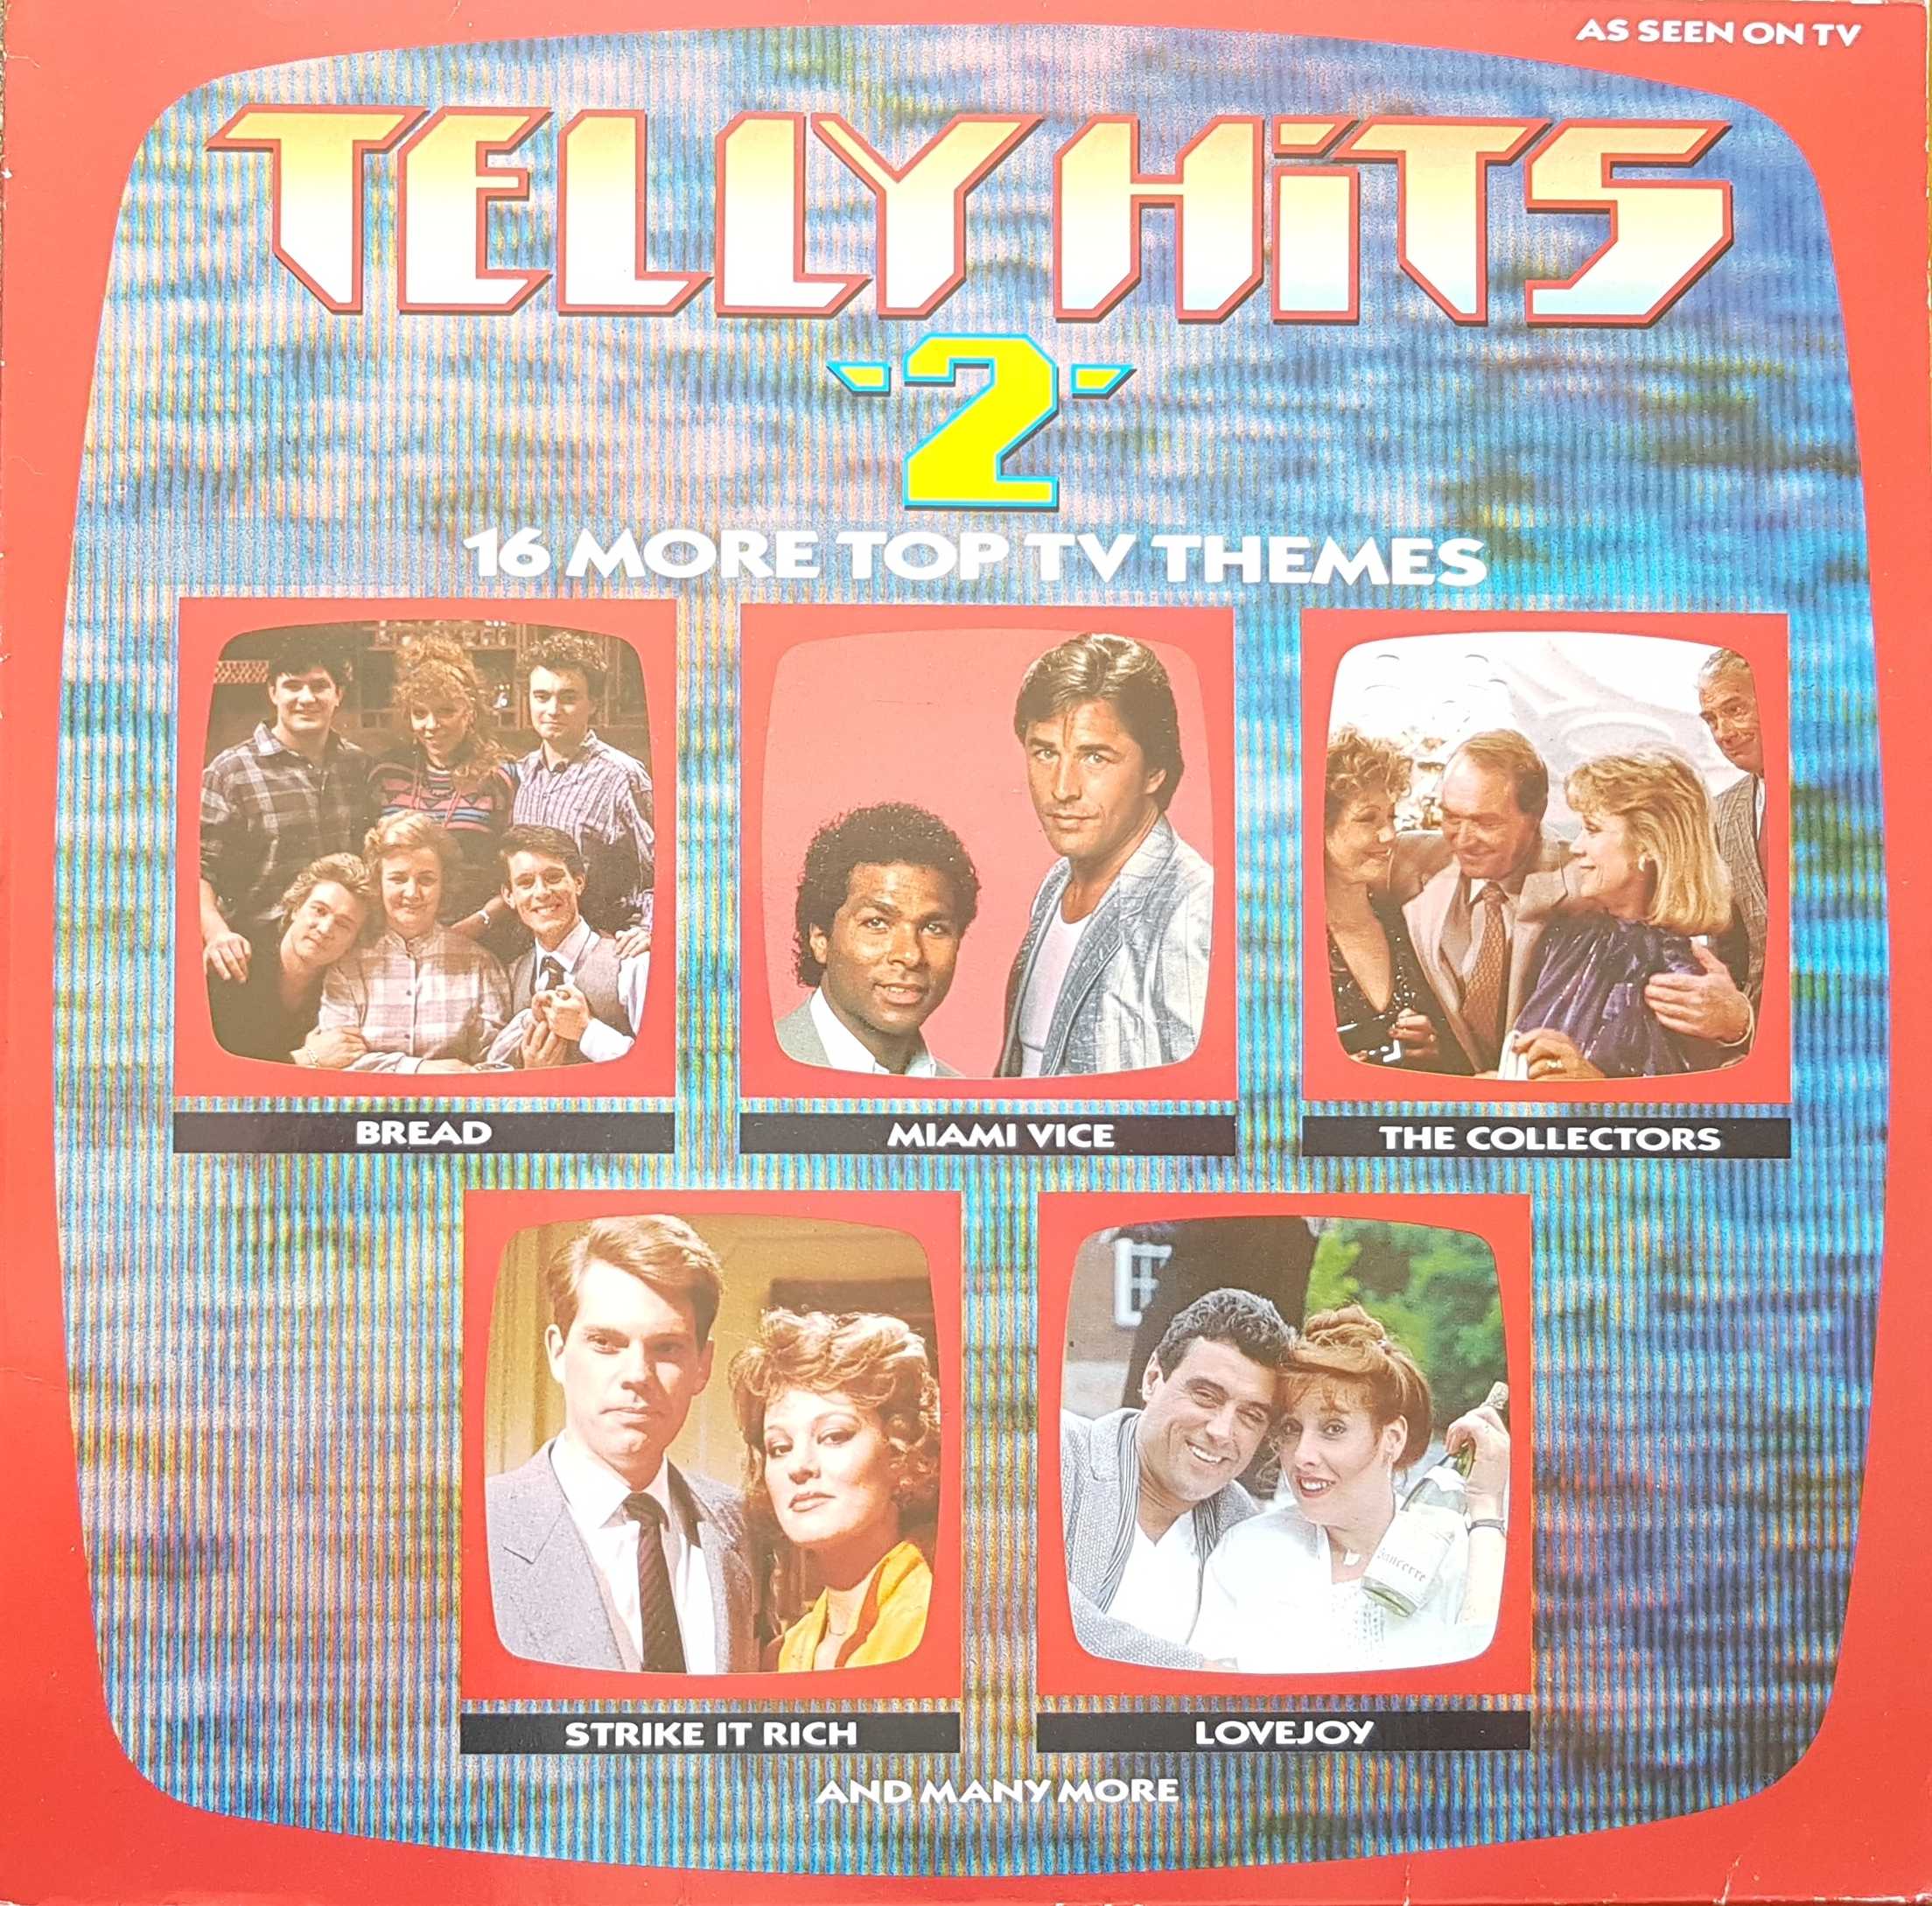 Picture of Telly hits - Volume 2 by artist Various from ITV, Channel 4 and Channel 5 albums library